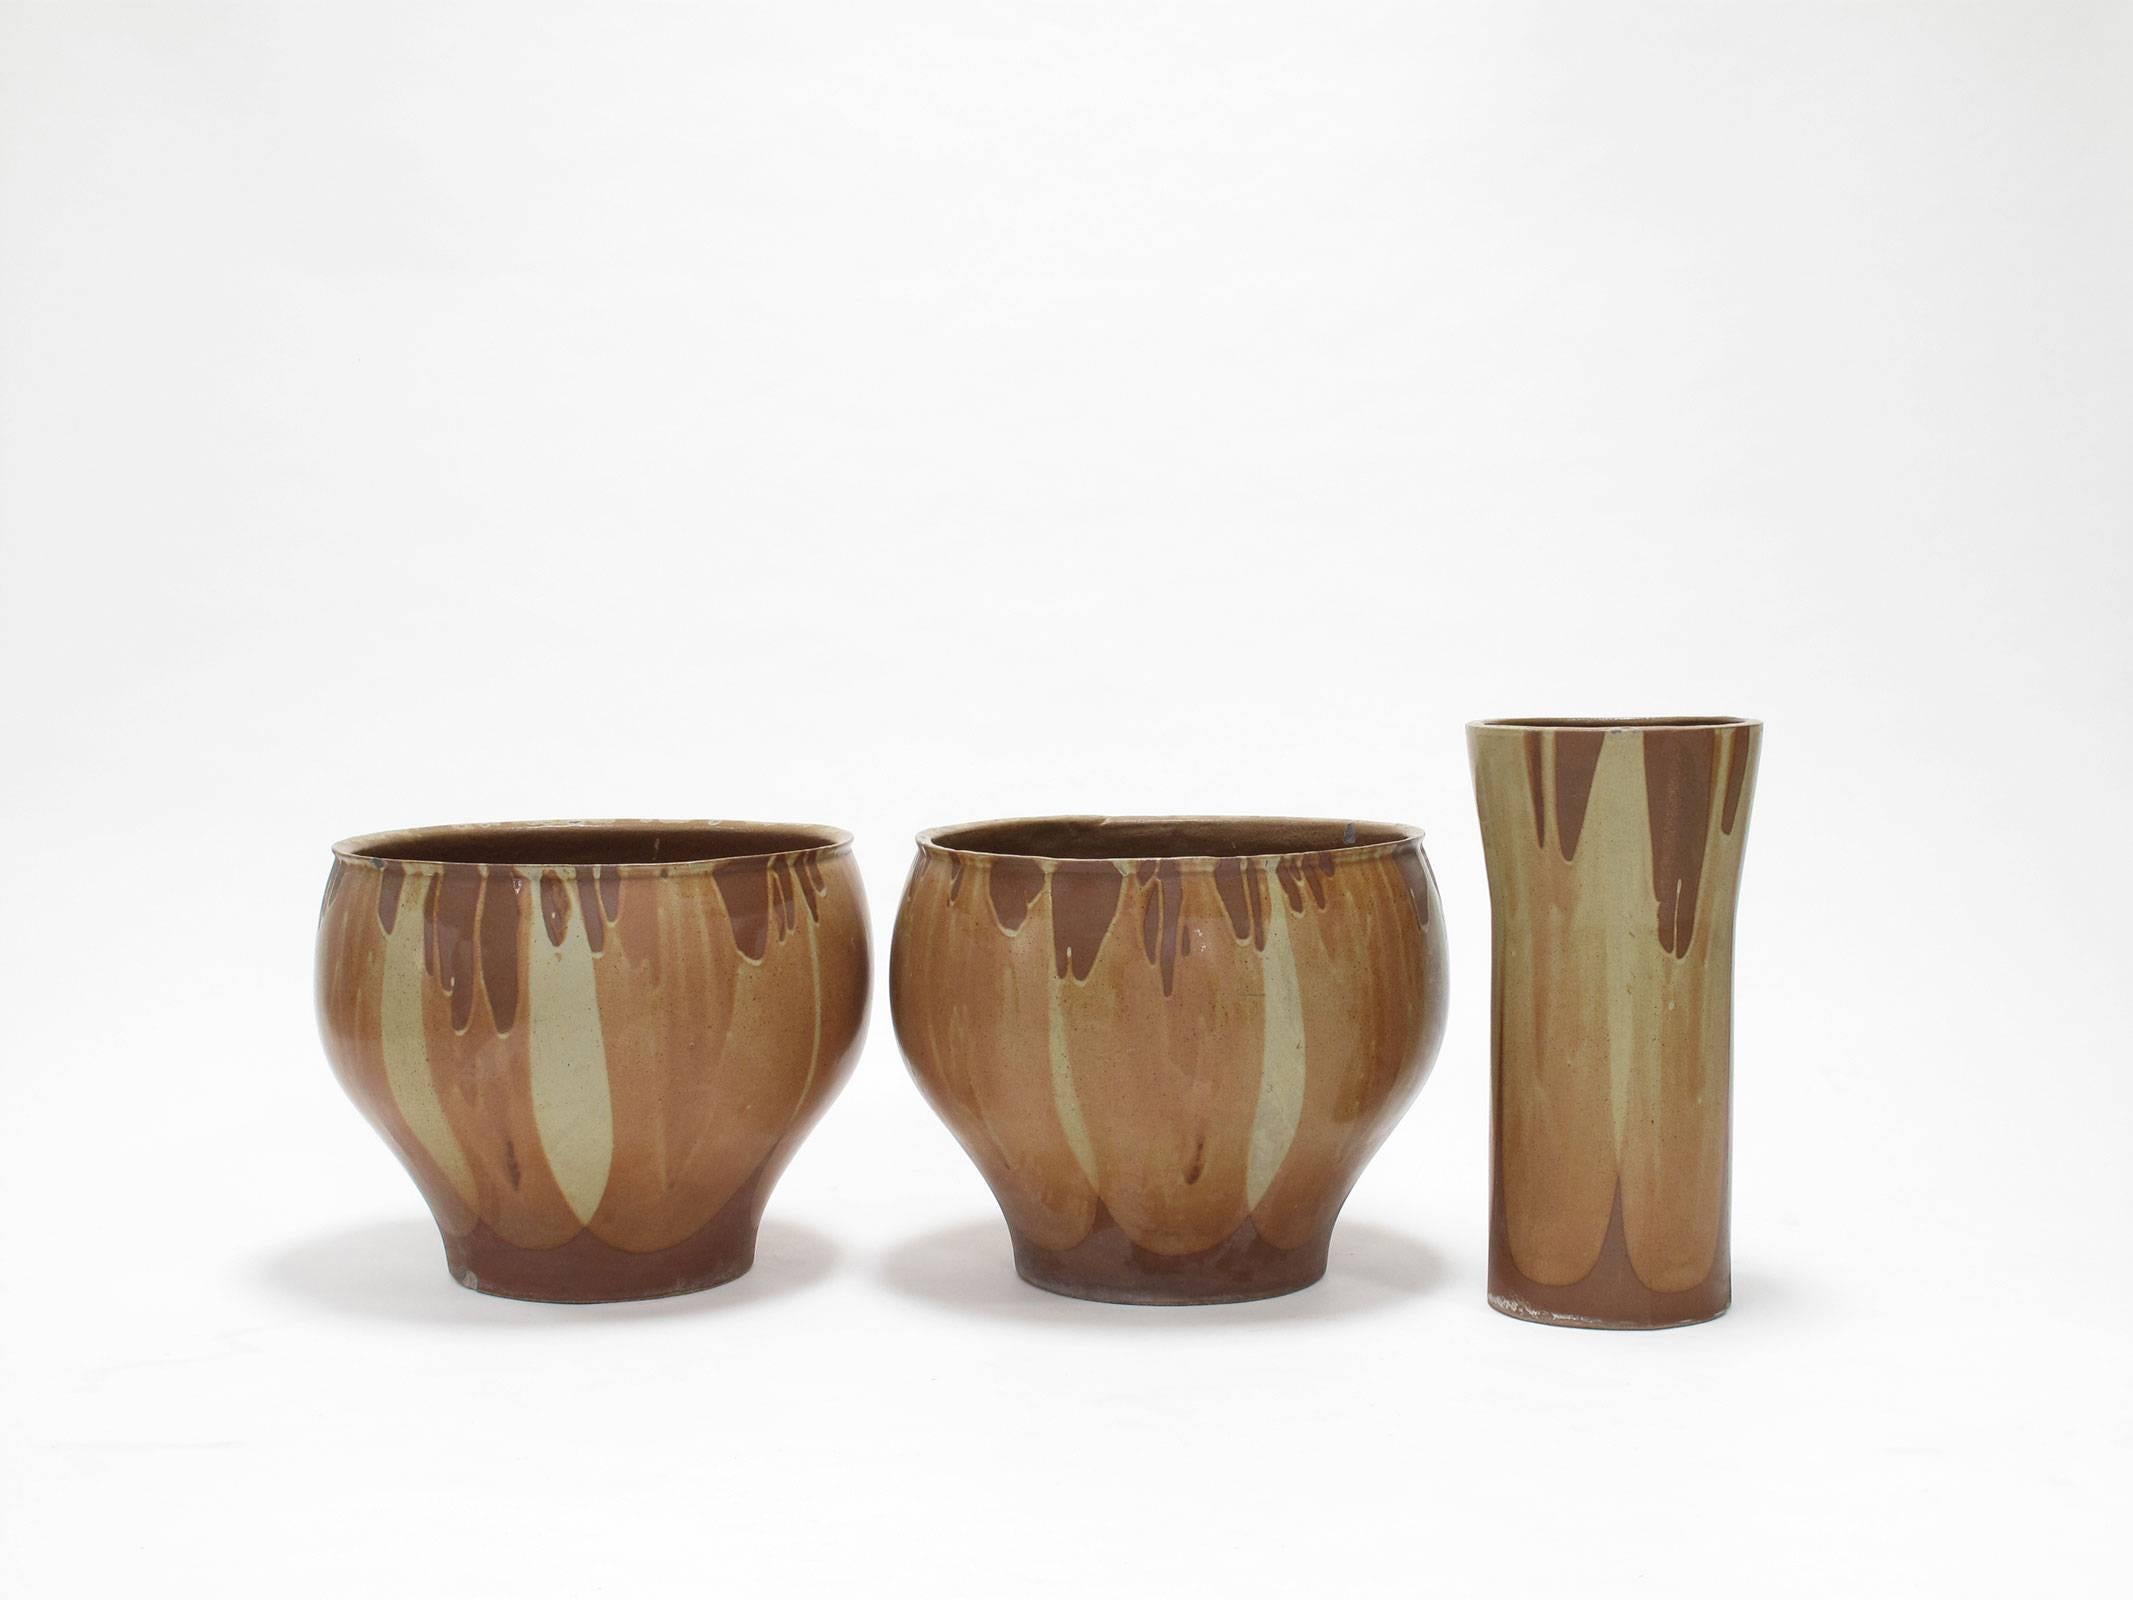 Collection of three David Cressey 'flame' design ceramic vessels, stoneware, glazed golden ochre and sienna yellow, 1960s, Pro Artisan collection, Architectural Pottery, Los Angeles, California, two measuring 15.75 high x 19.75 diameter inches and